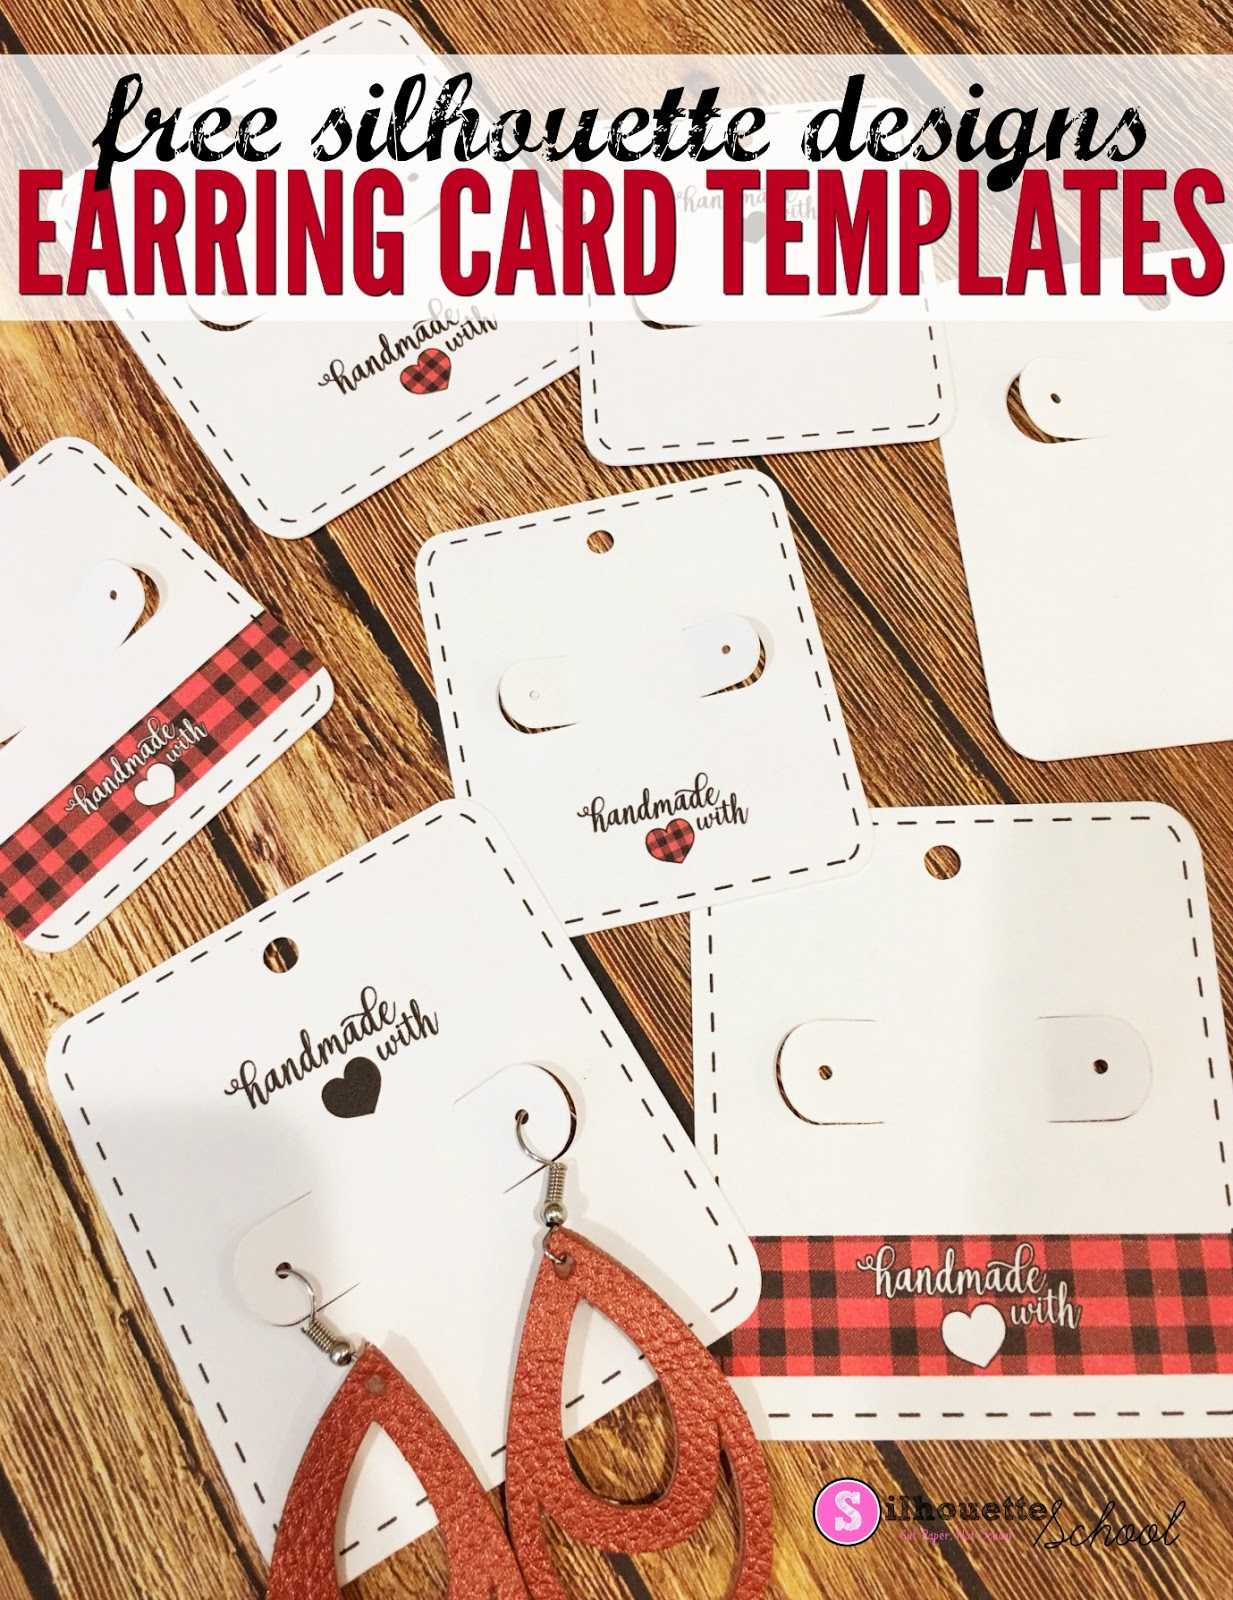 Free Silhouette Earring Card Templates (Set Of 8 Intended For Free Svg Card Templates